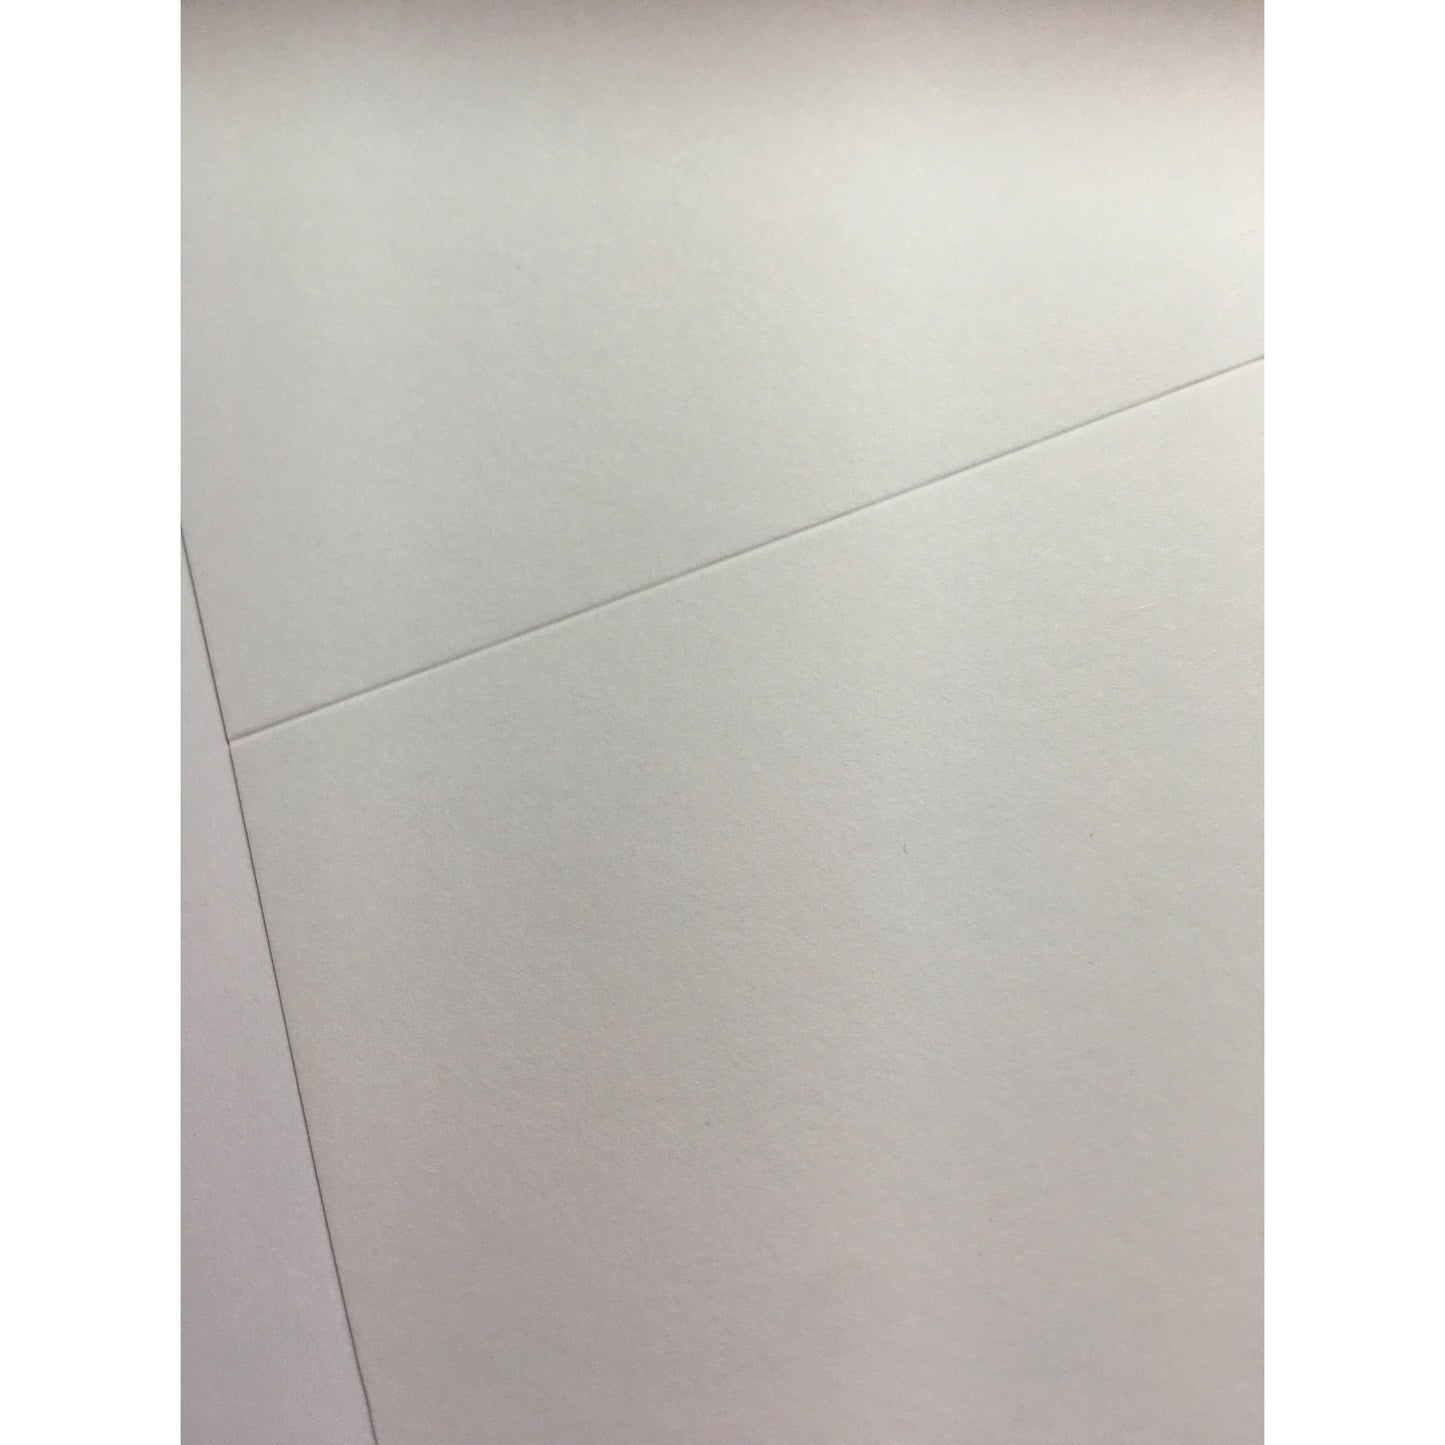 White Smooth Card 210gsm Pack of 20 Sheets